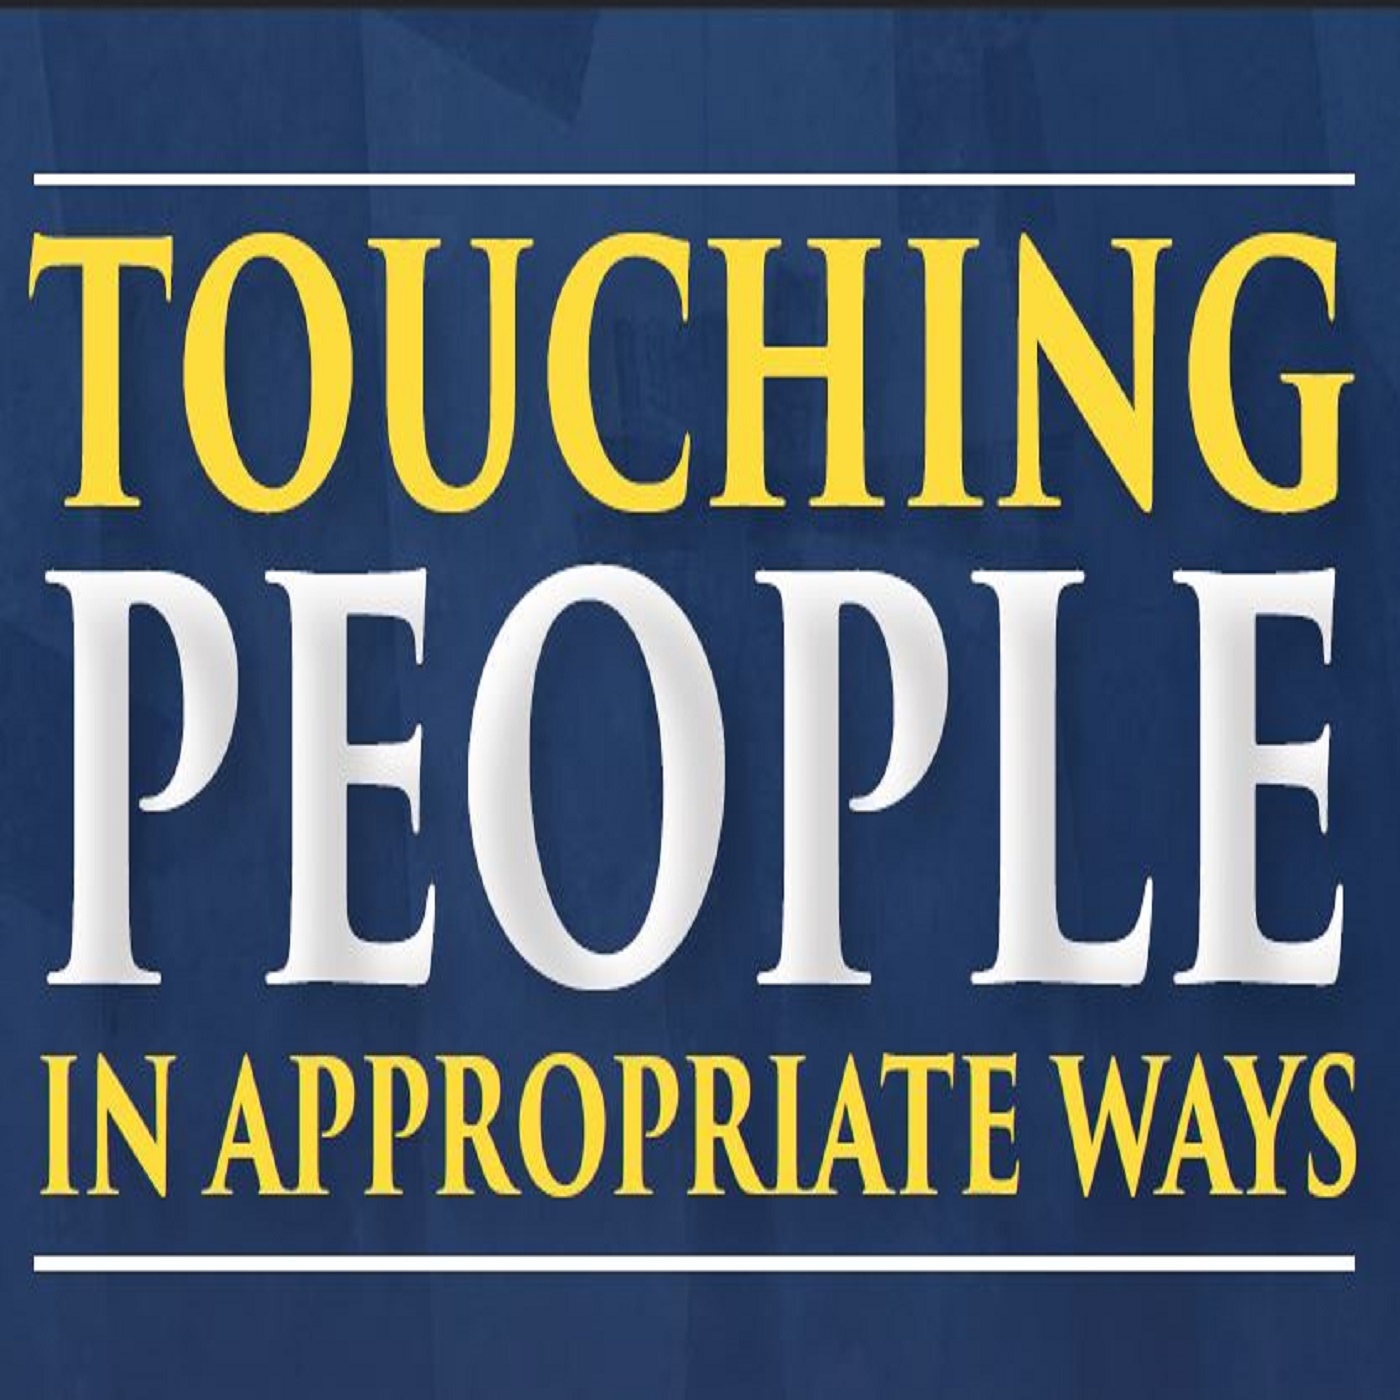 Touching People In Appropriate Ways